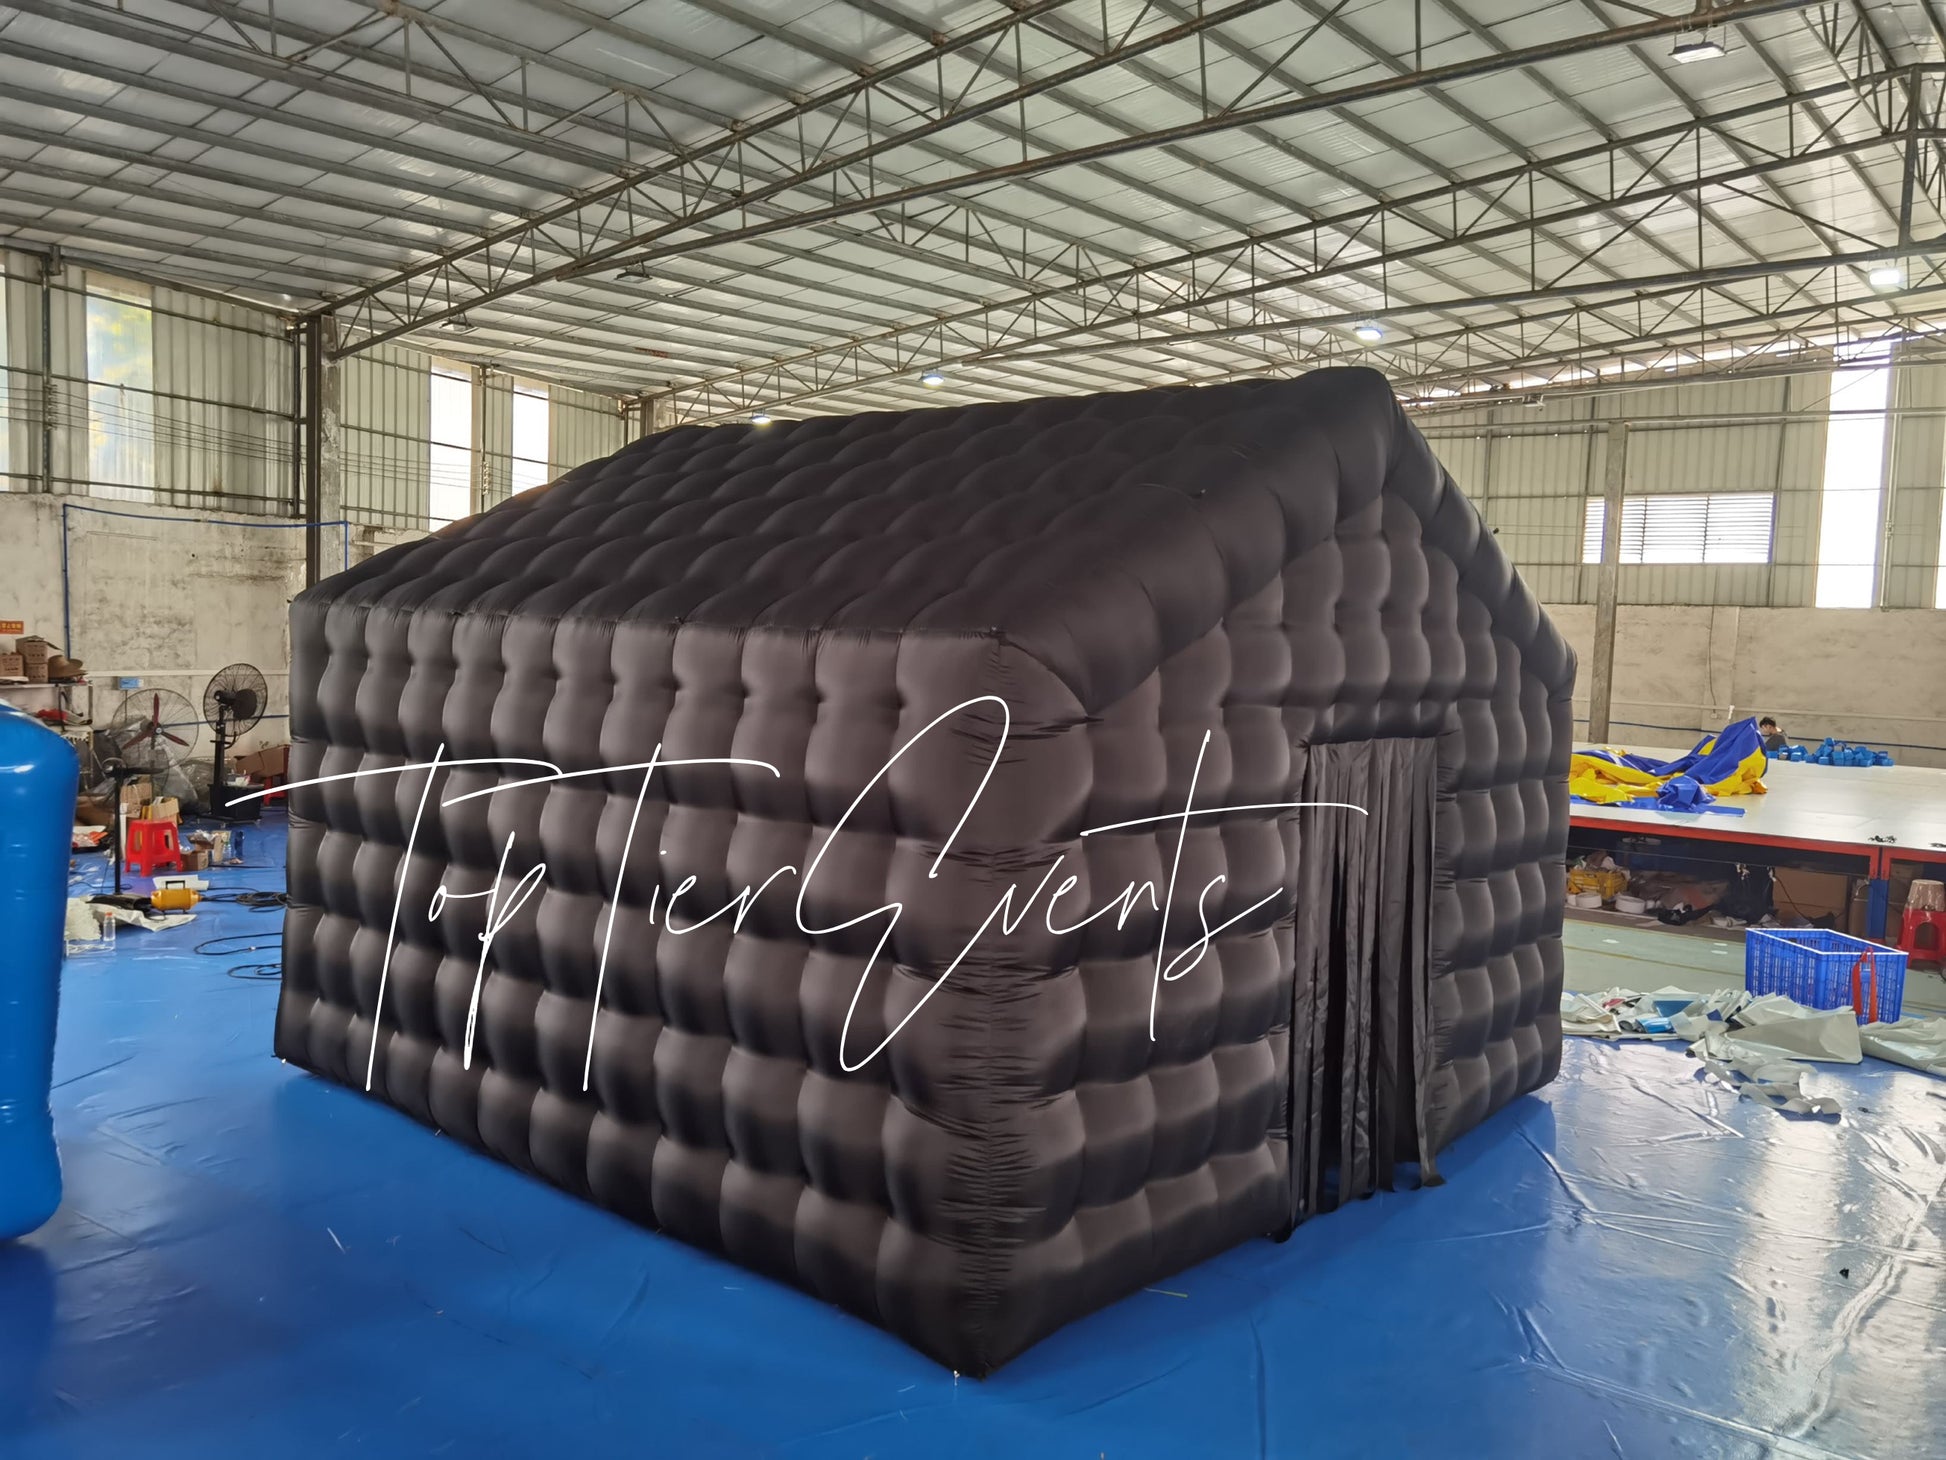 Massive 50X50X20ft LED INFLATABLE NIGHTCLUB – Top Tier Events